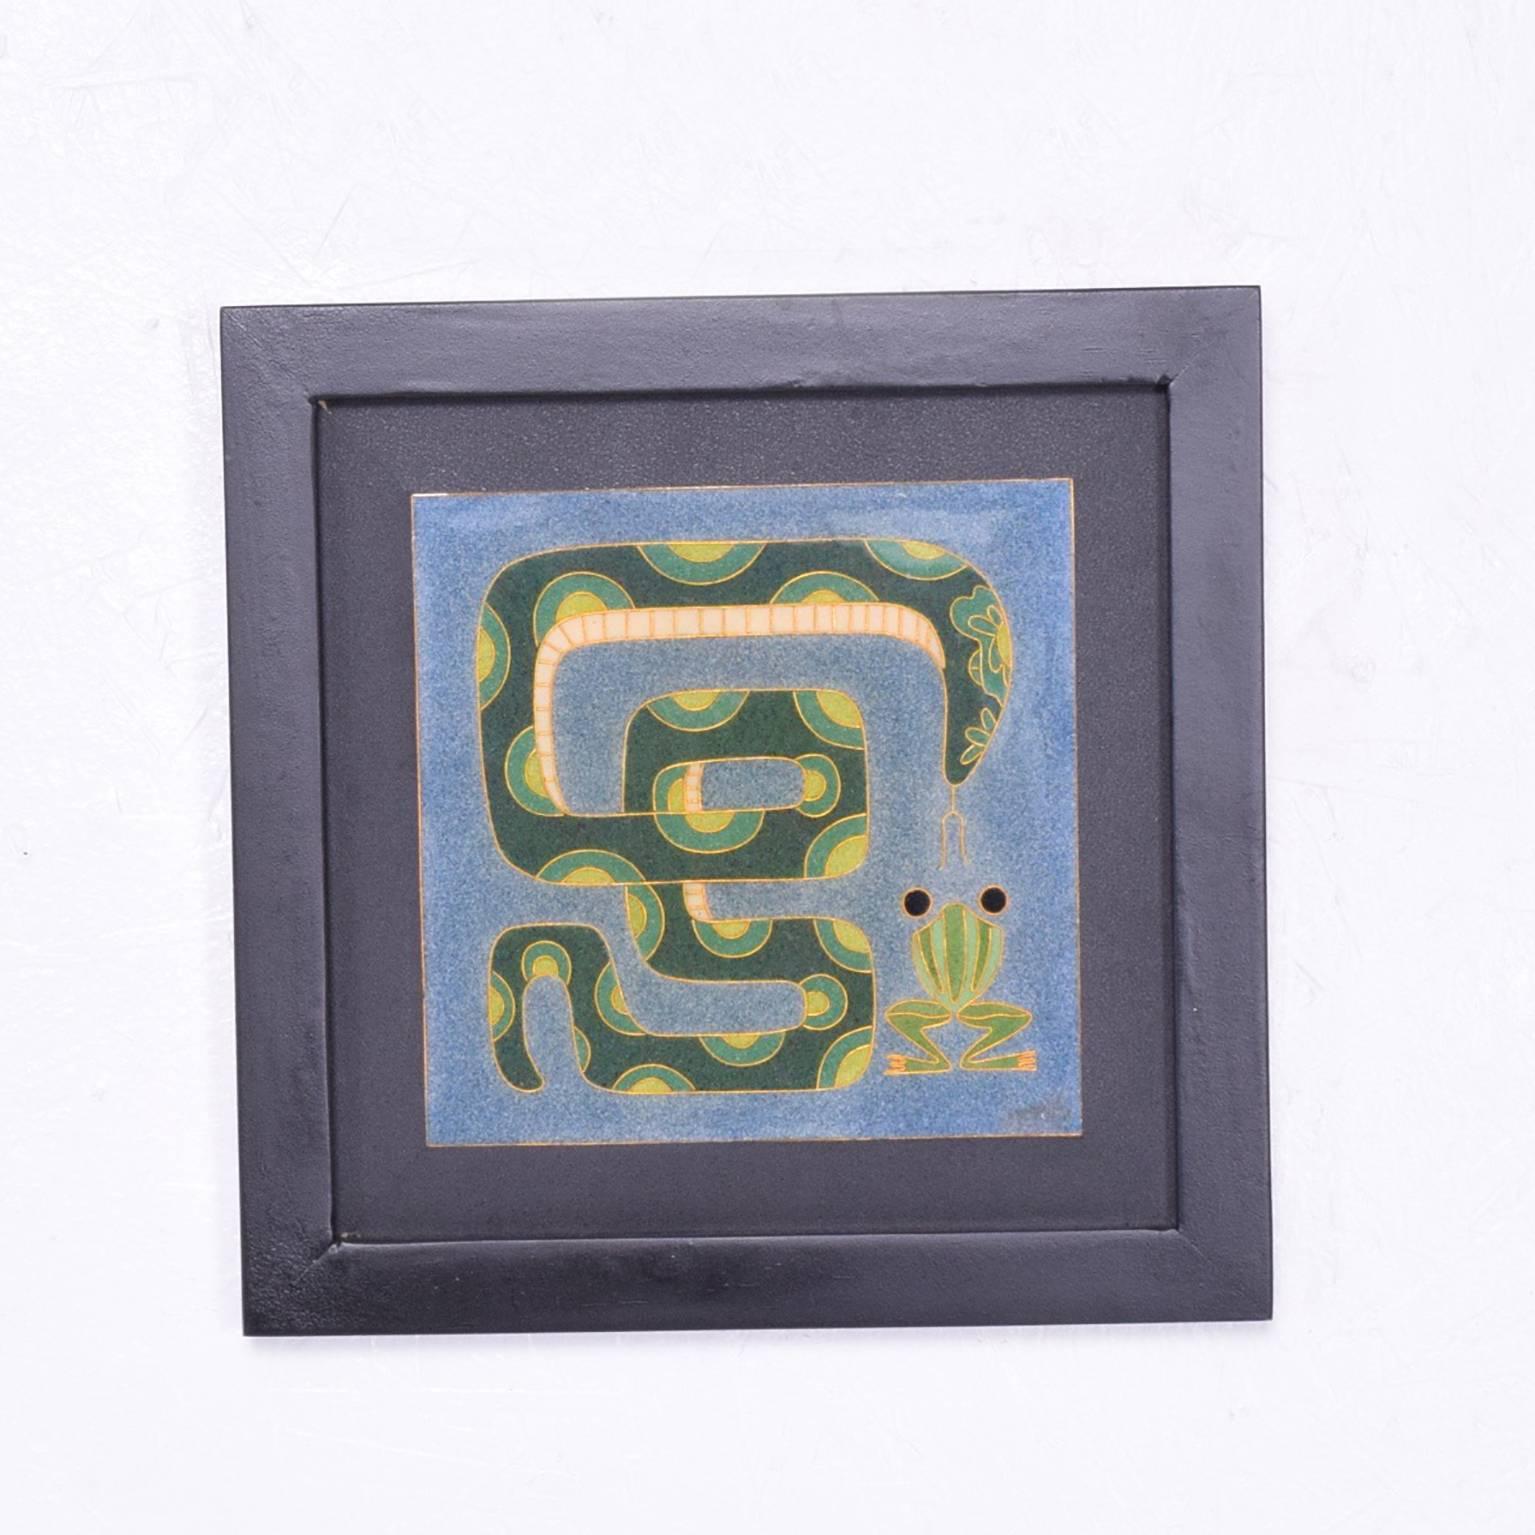 For your consideration, a modern art work frog and snake enamel style.
Dimensions: 10 5/8